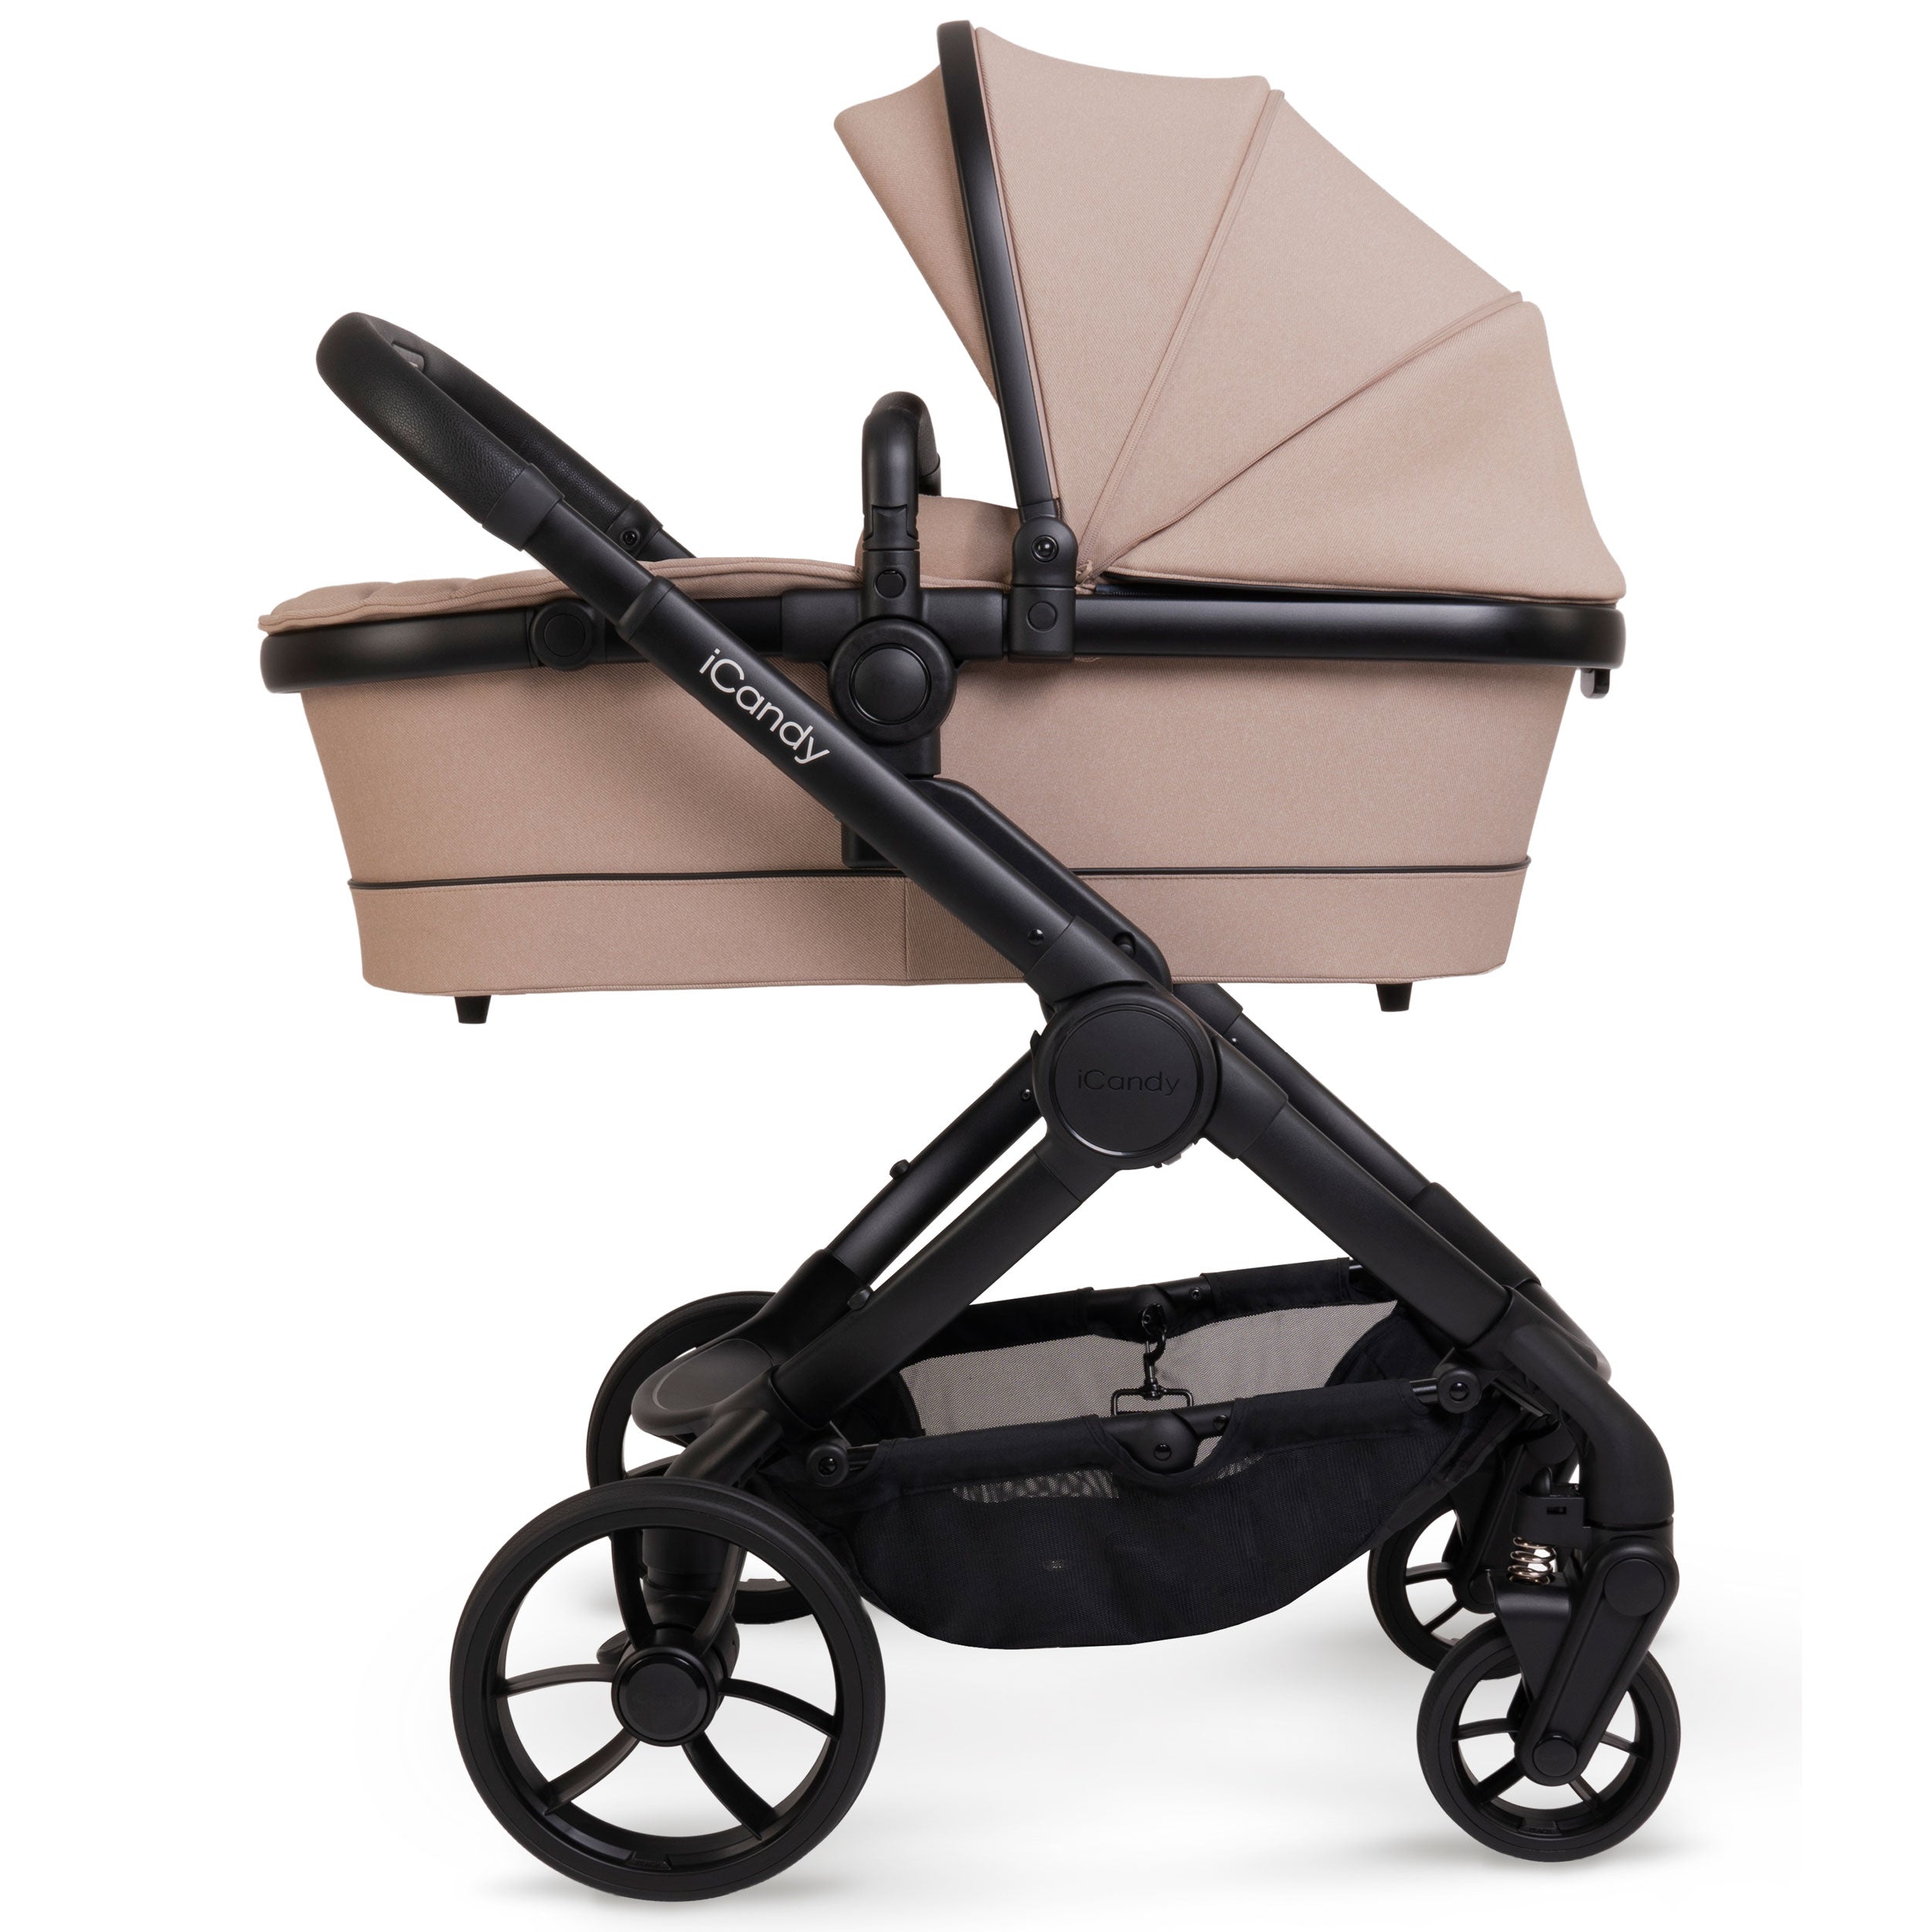 iCandy Peach 7 Cybex Combo Set in Cookie